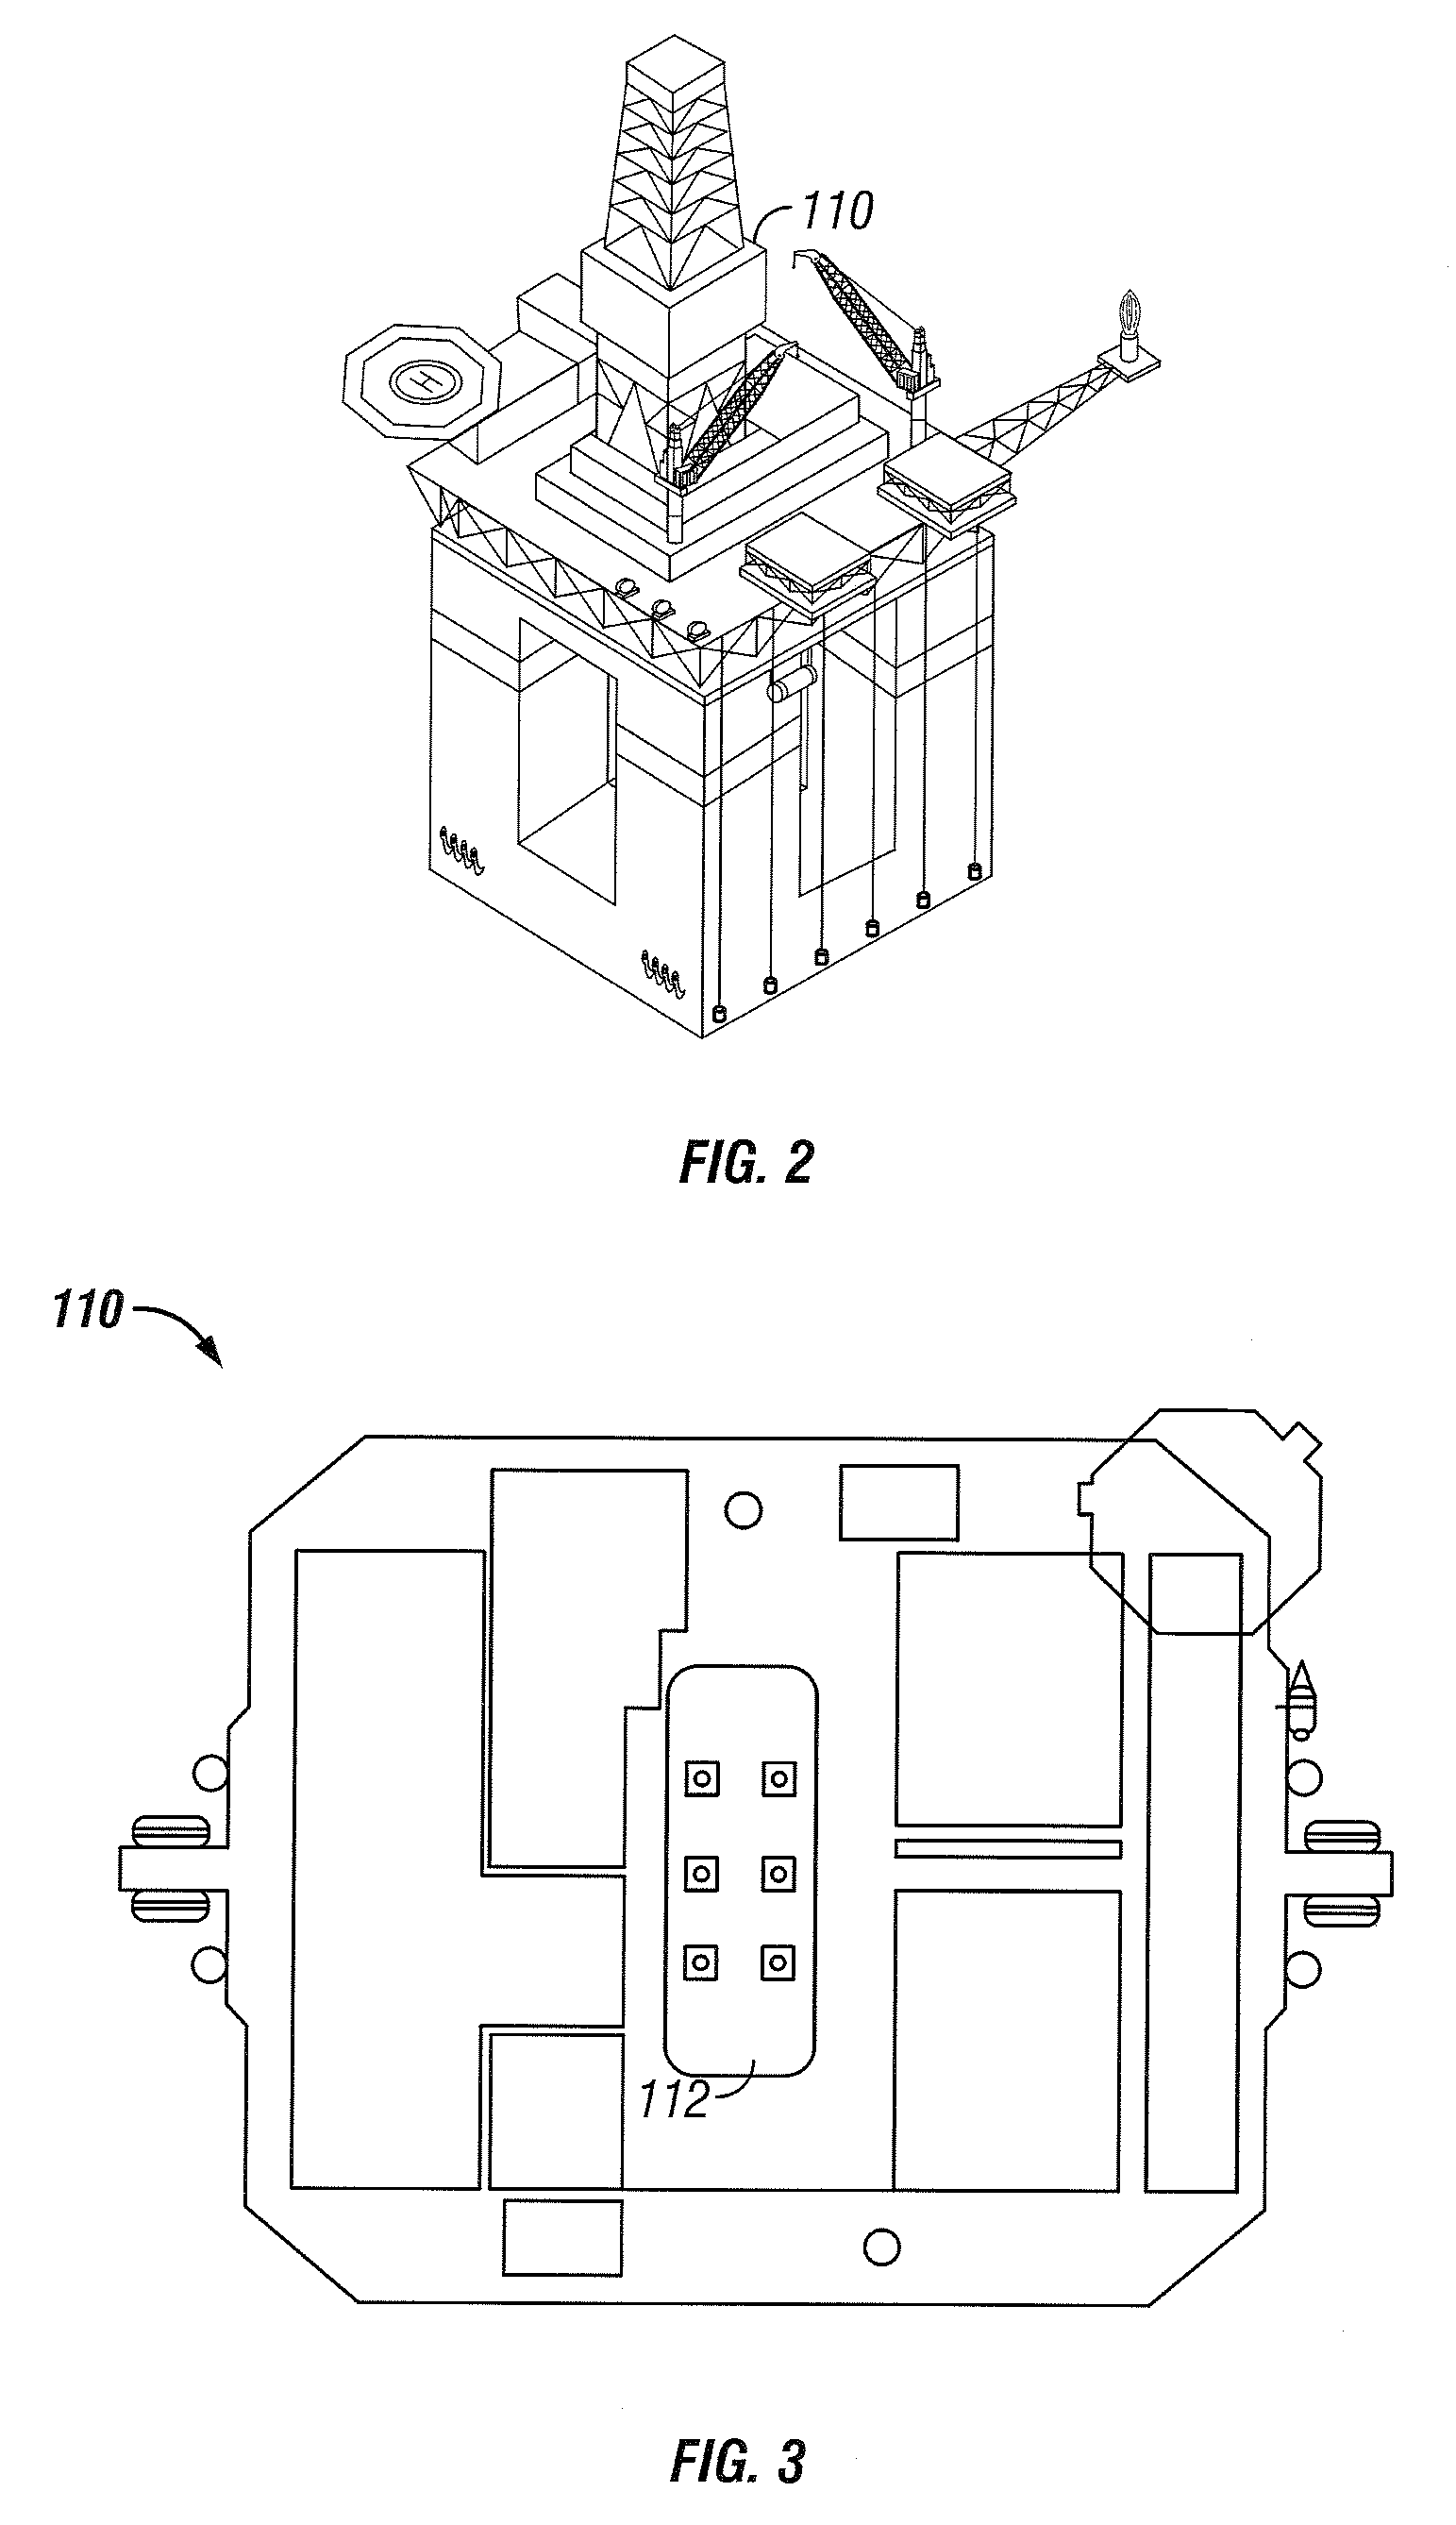 Dry tree subsea well communications apparatus and method using variable tension large offset risers